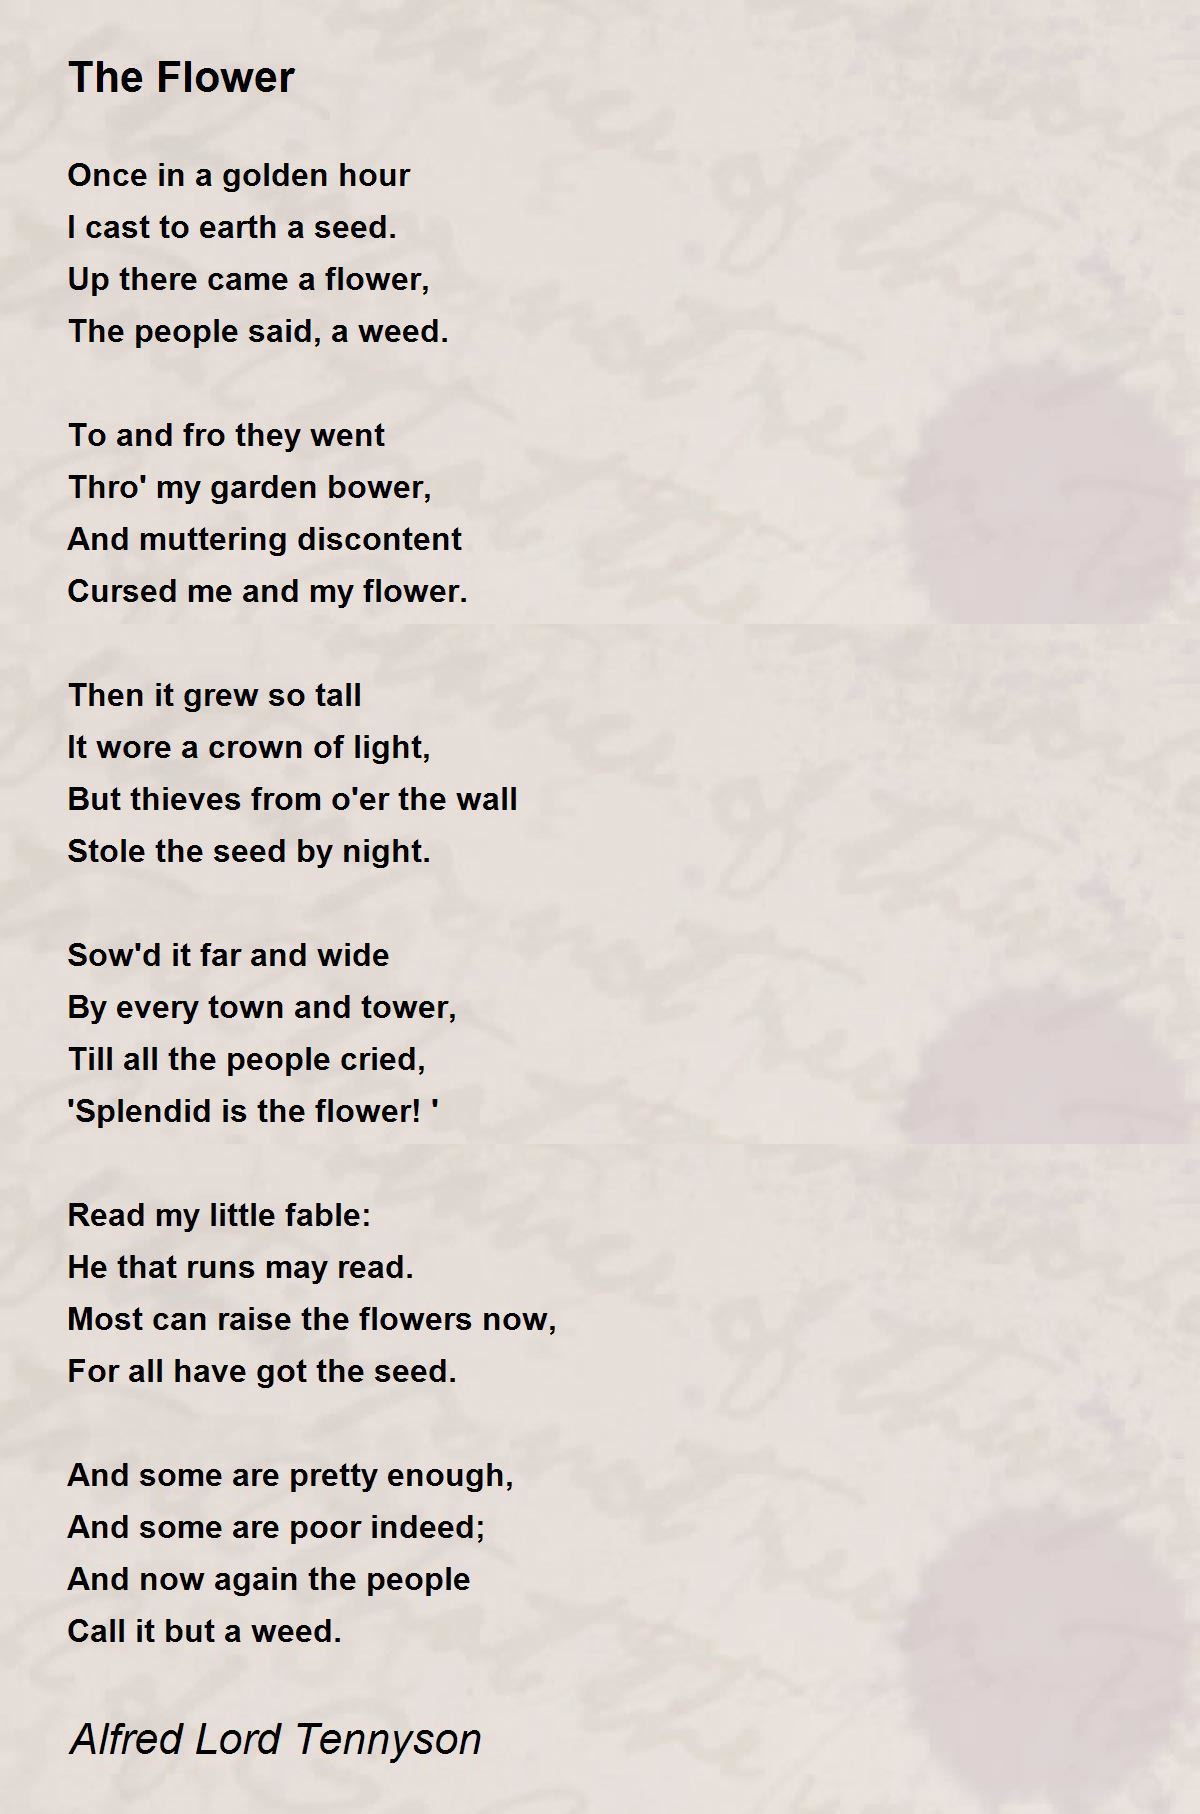 The Flower Poem by Alfred Lord Tennyson - Poem Hunter Comments